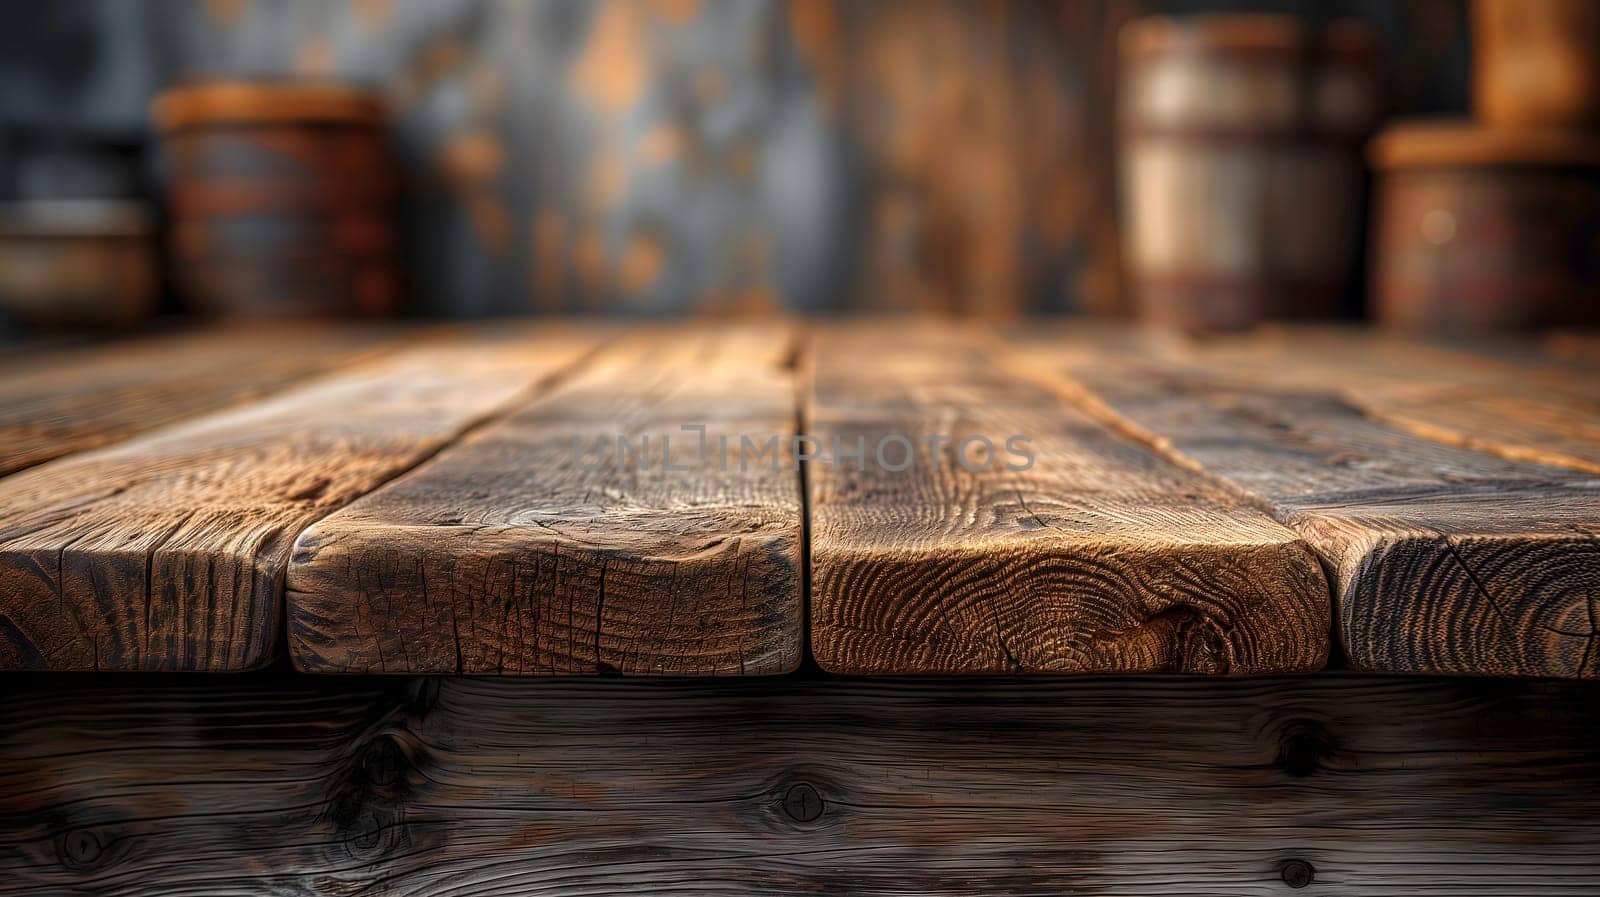 Empty wooden table for rustic background, vintage American style, montage-friendly, retro vibes, creative space, no text. Neural network generated image. Not based on any actual scene or pattern.